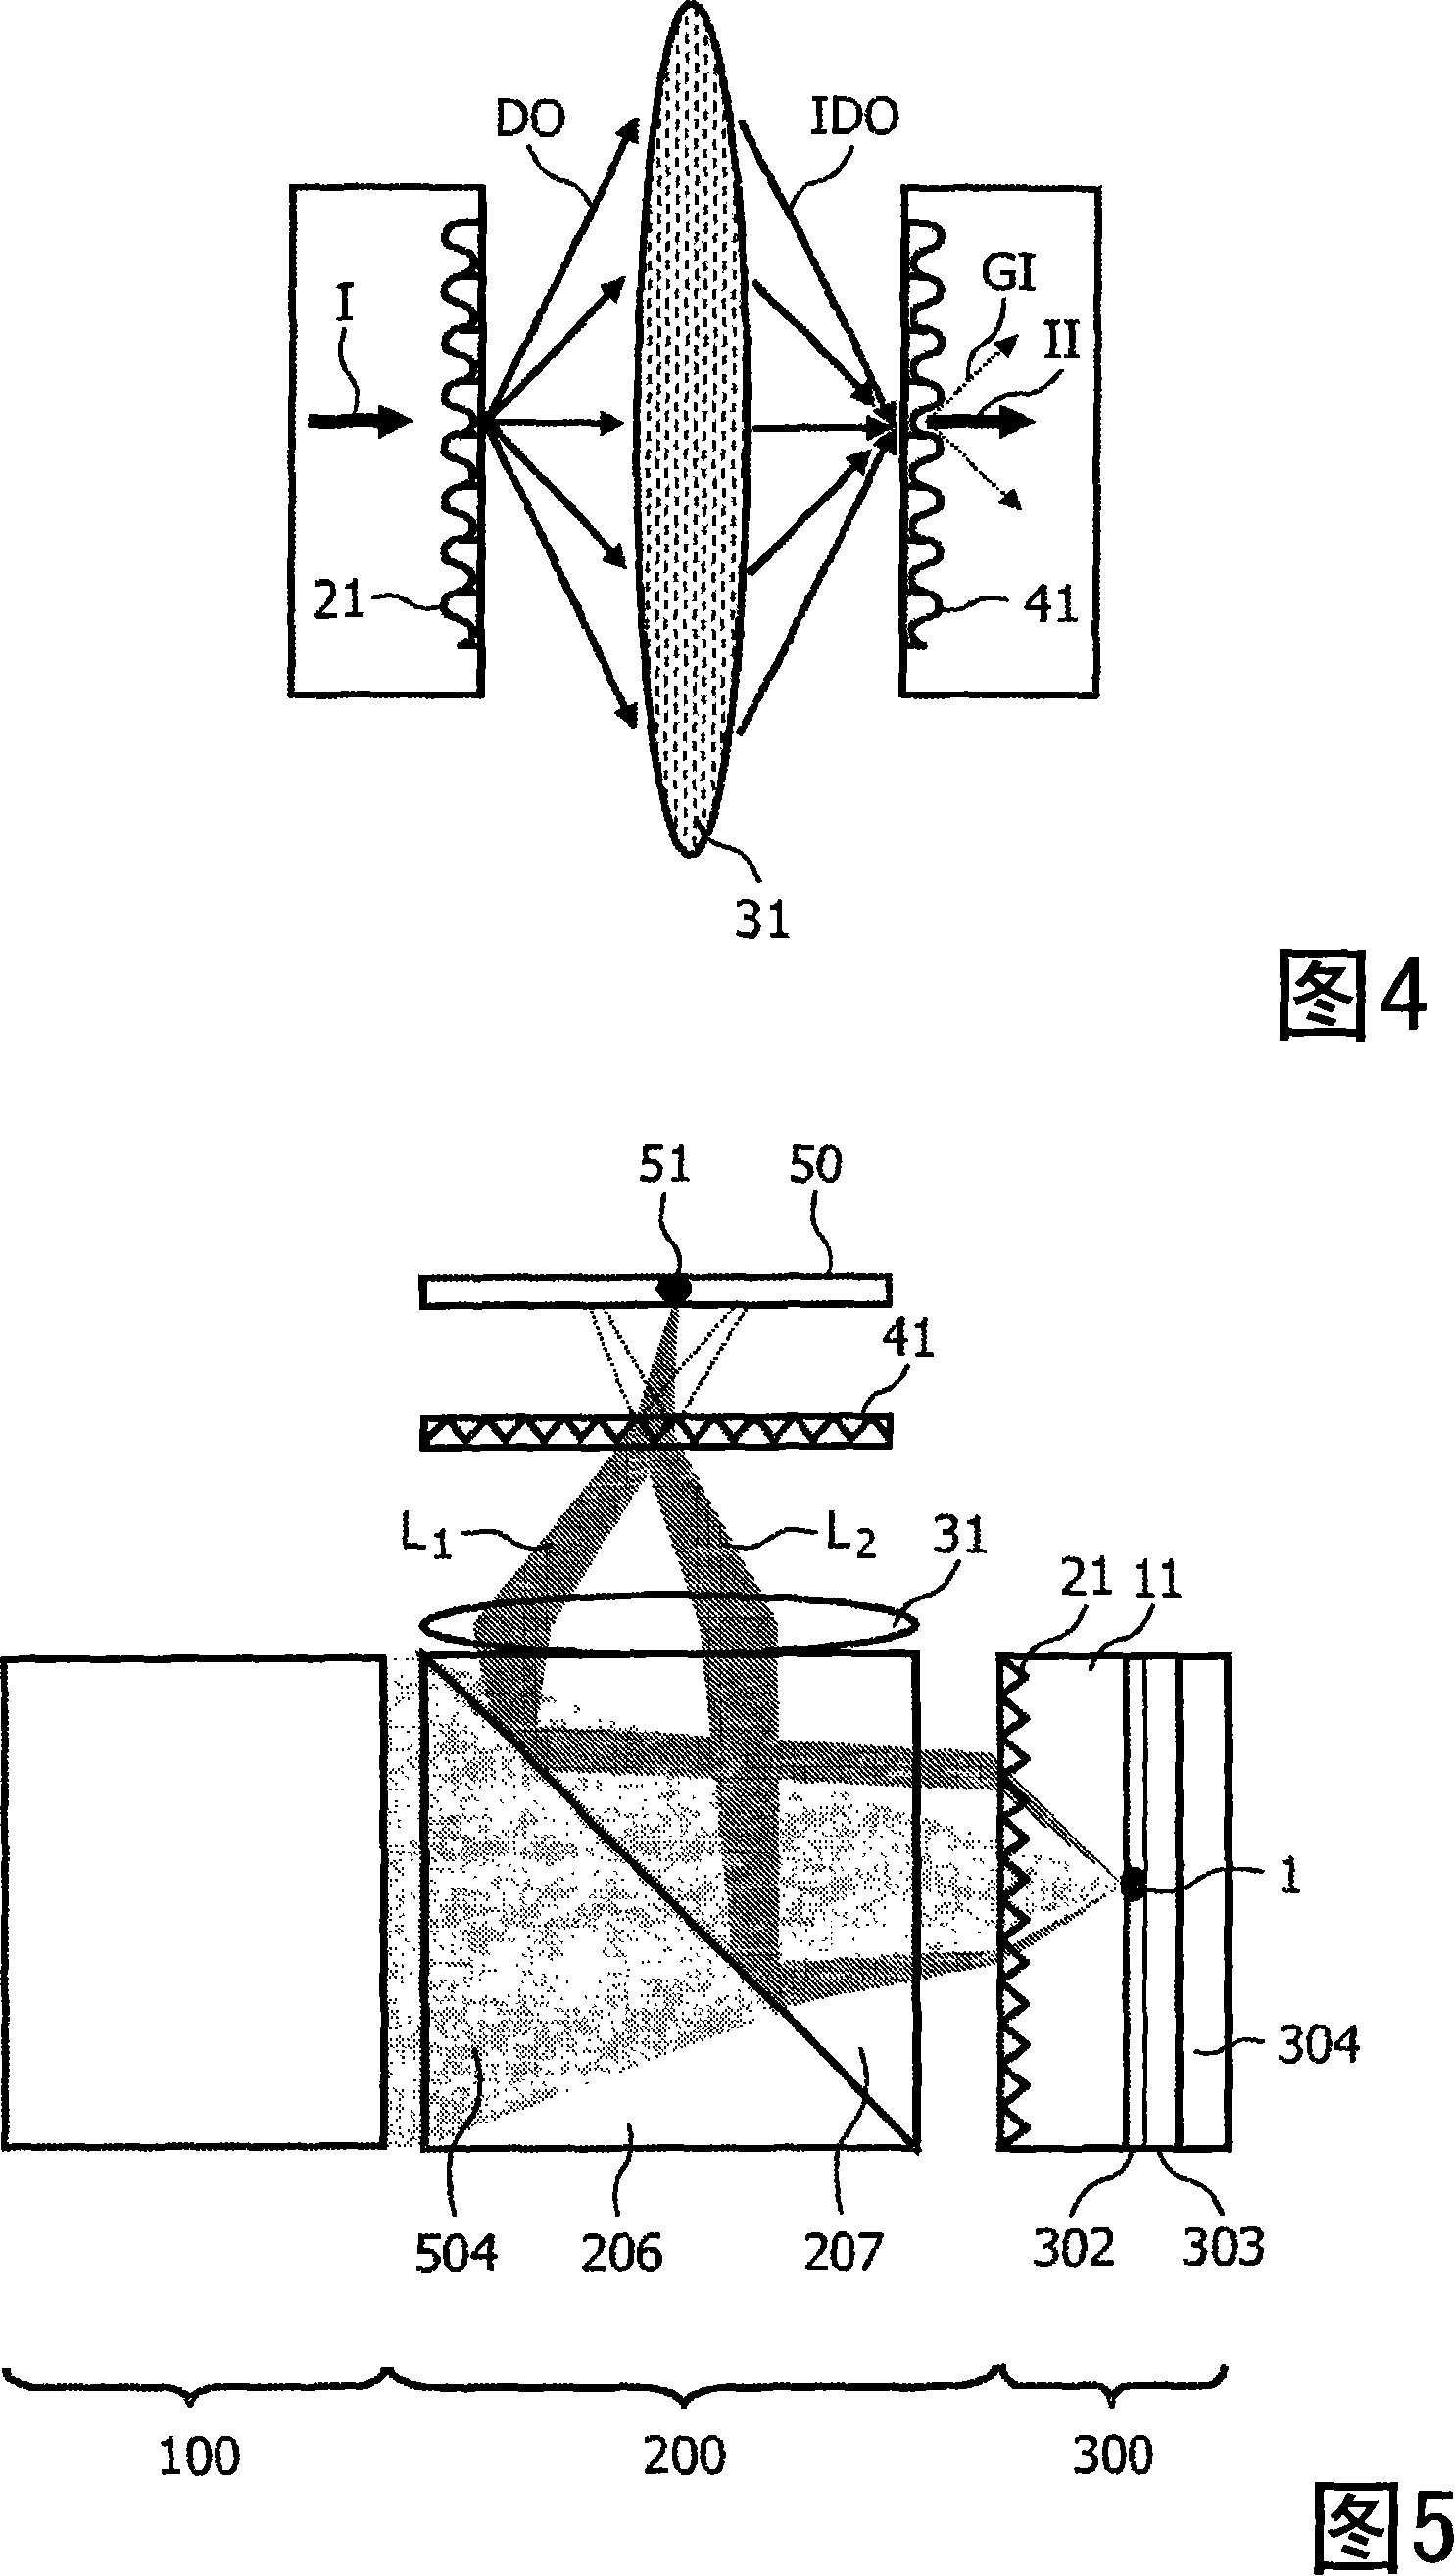 Optical system with diffraction optical element used for mapping signal light onto a detector